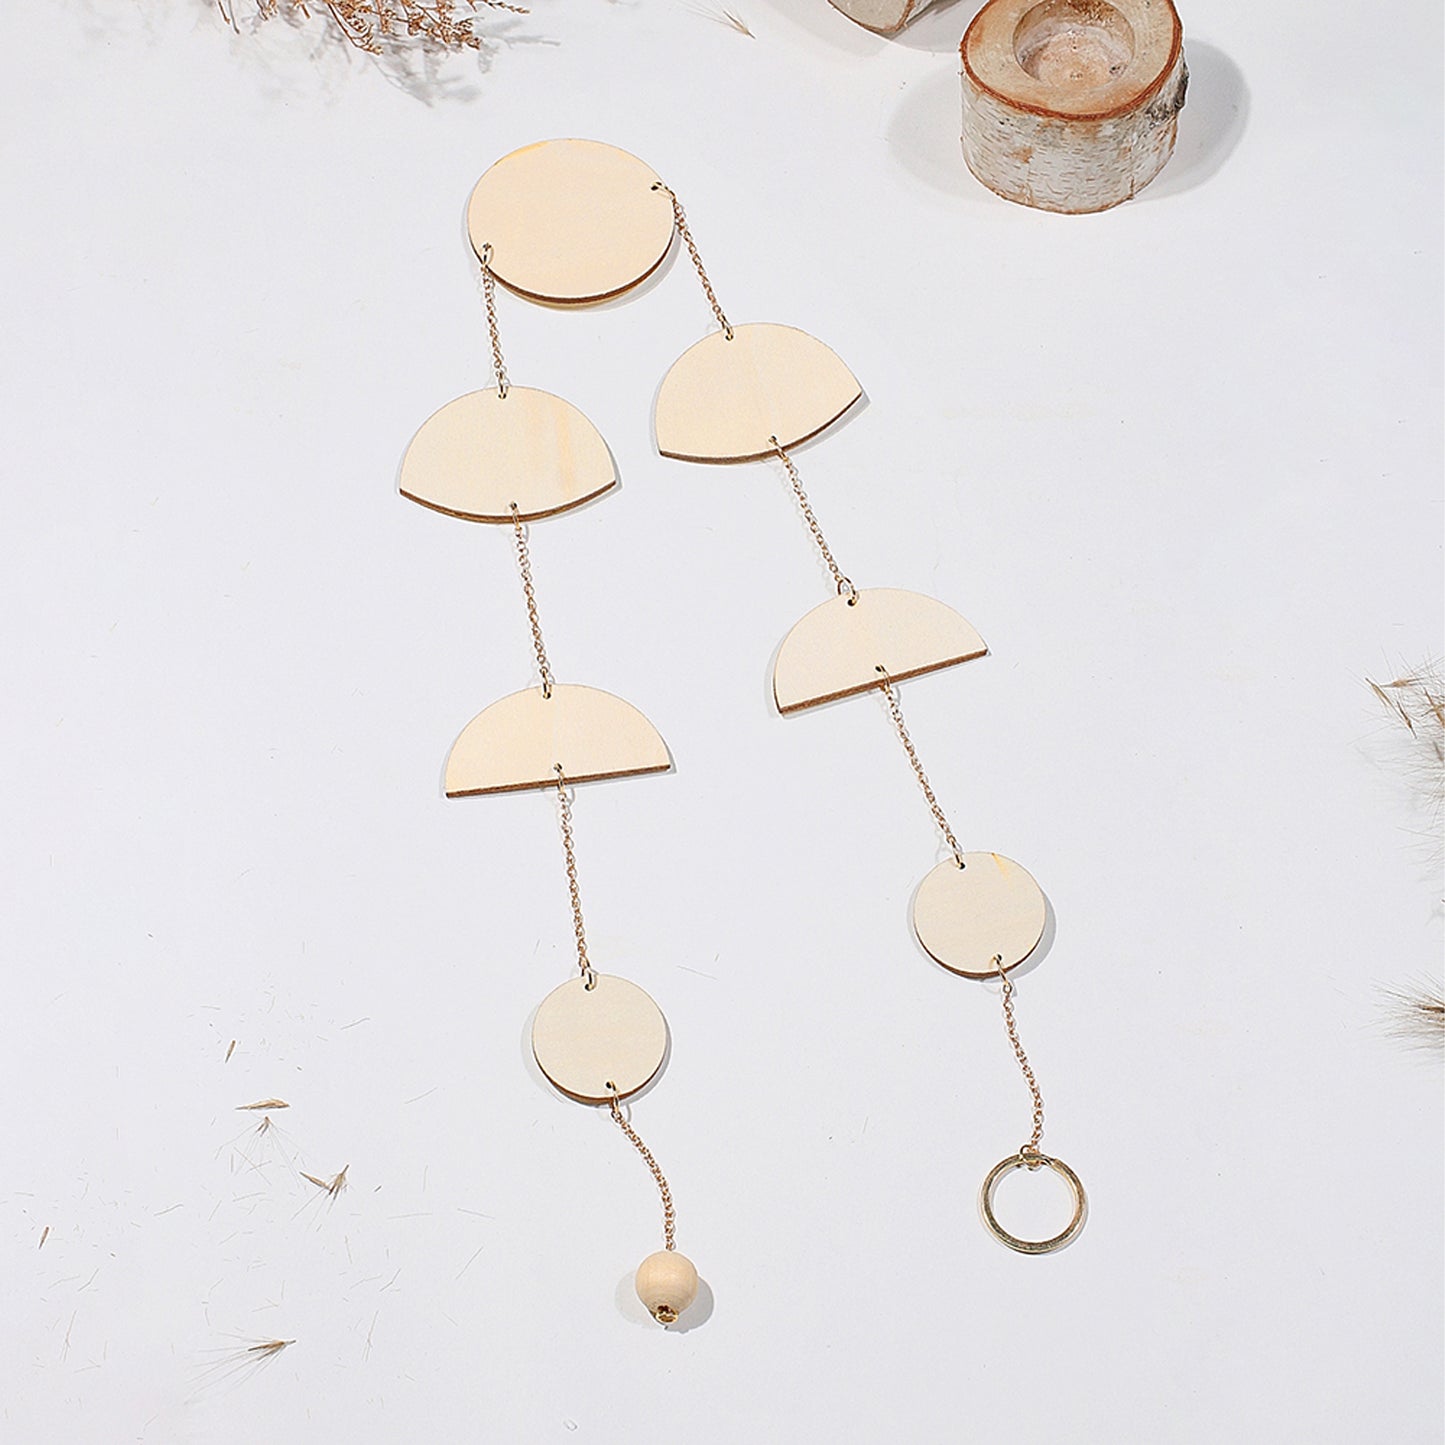 Wooden Moon Phase Wall Hanging Garland